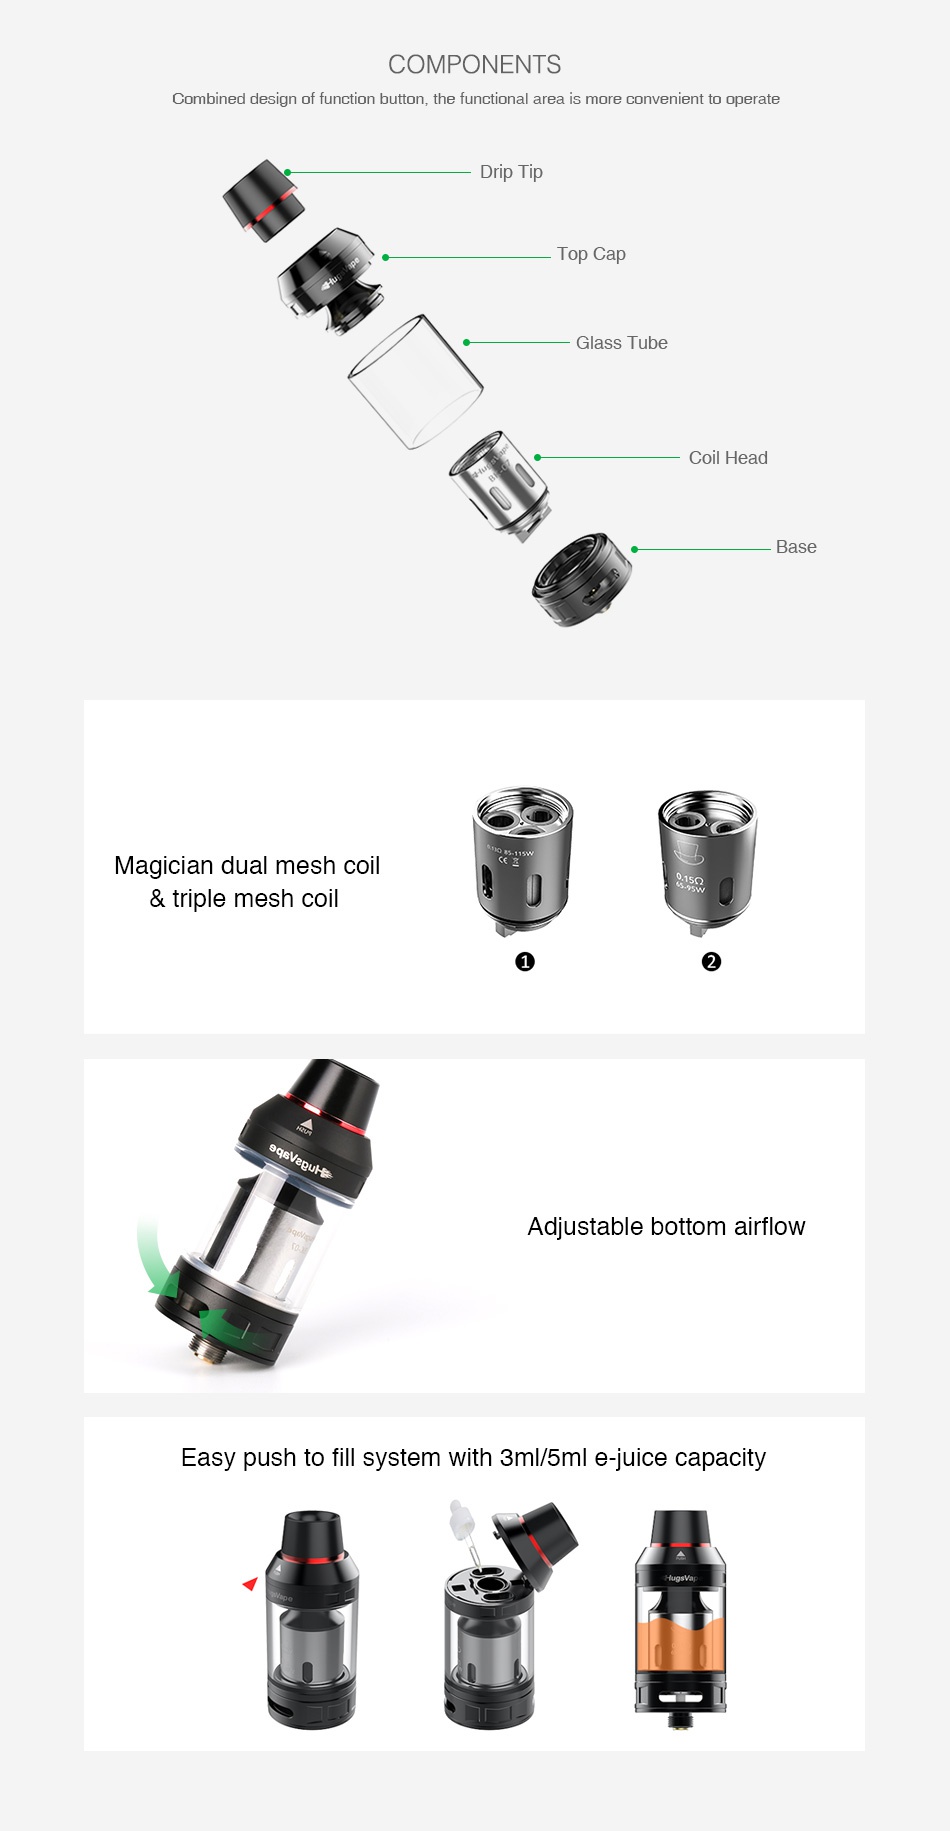 Hugsvape Magician Subohm Tank 3ml COMPONENTS Combined design of function button  the functional area is more convenient to operate Top Cap Glass Tube Coil Head Magician dual mesh coi triple mesh coi Adiustable bottom airflow asy push to fill system with 3m 5ml e juice capacity Hussar